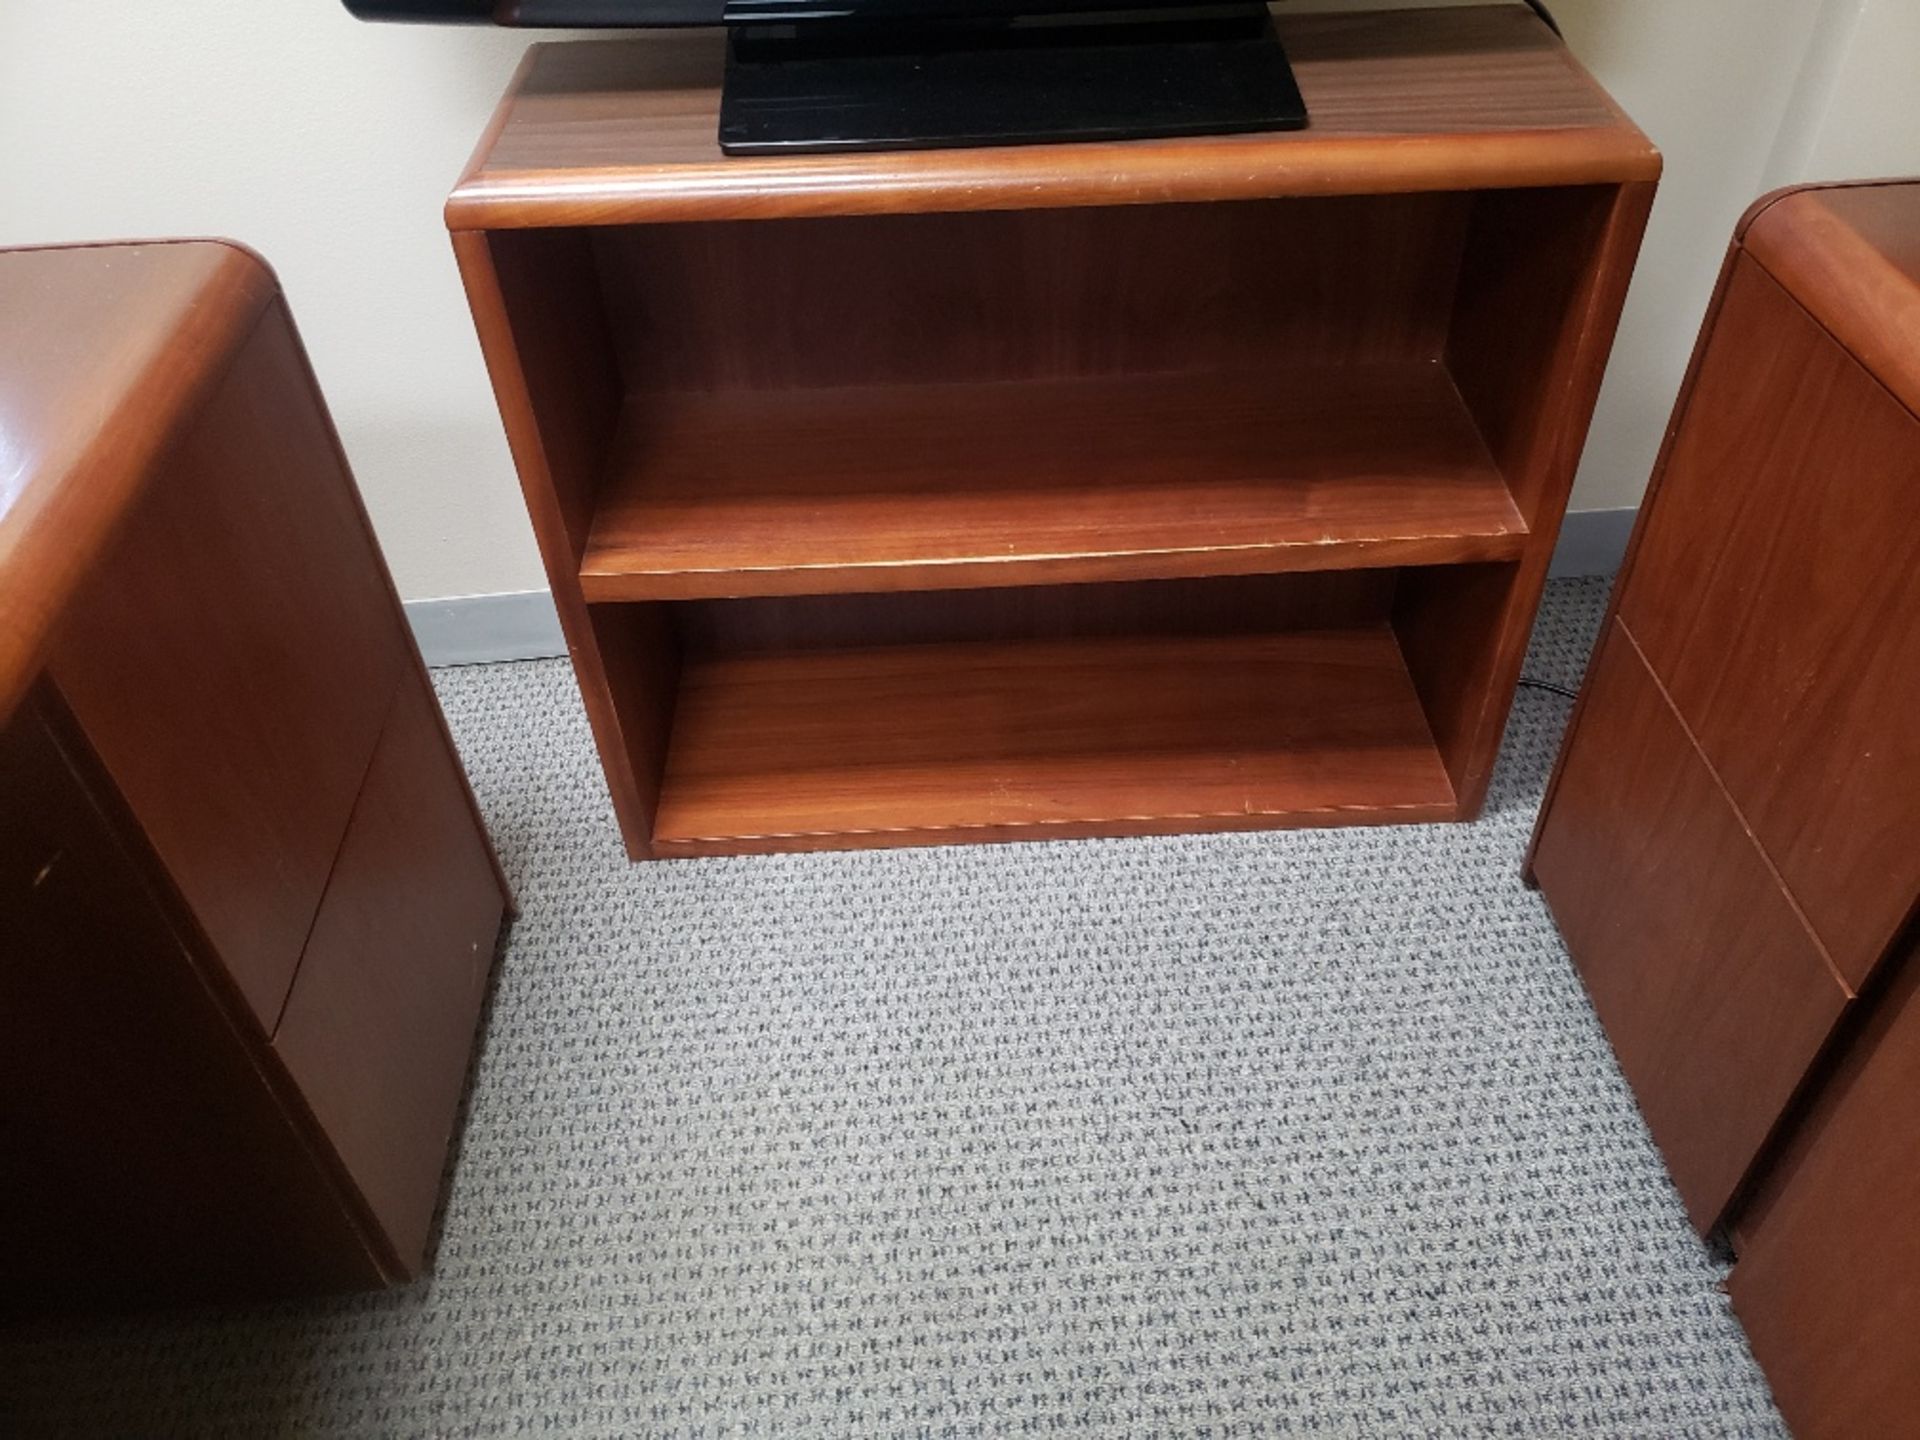 EXECUTIVE DESK, CREDENZA, TWO DOOR LATERAL FILE CABINET - Image 3 of 4